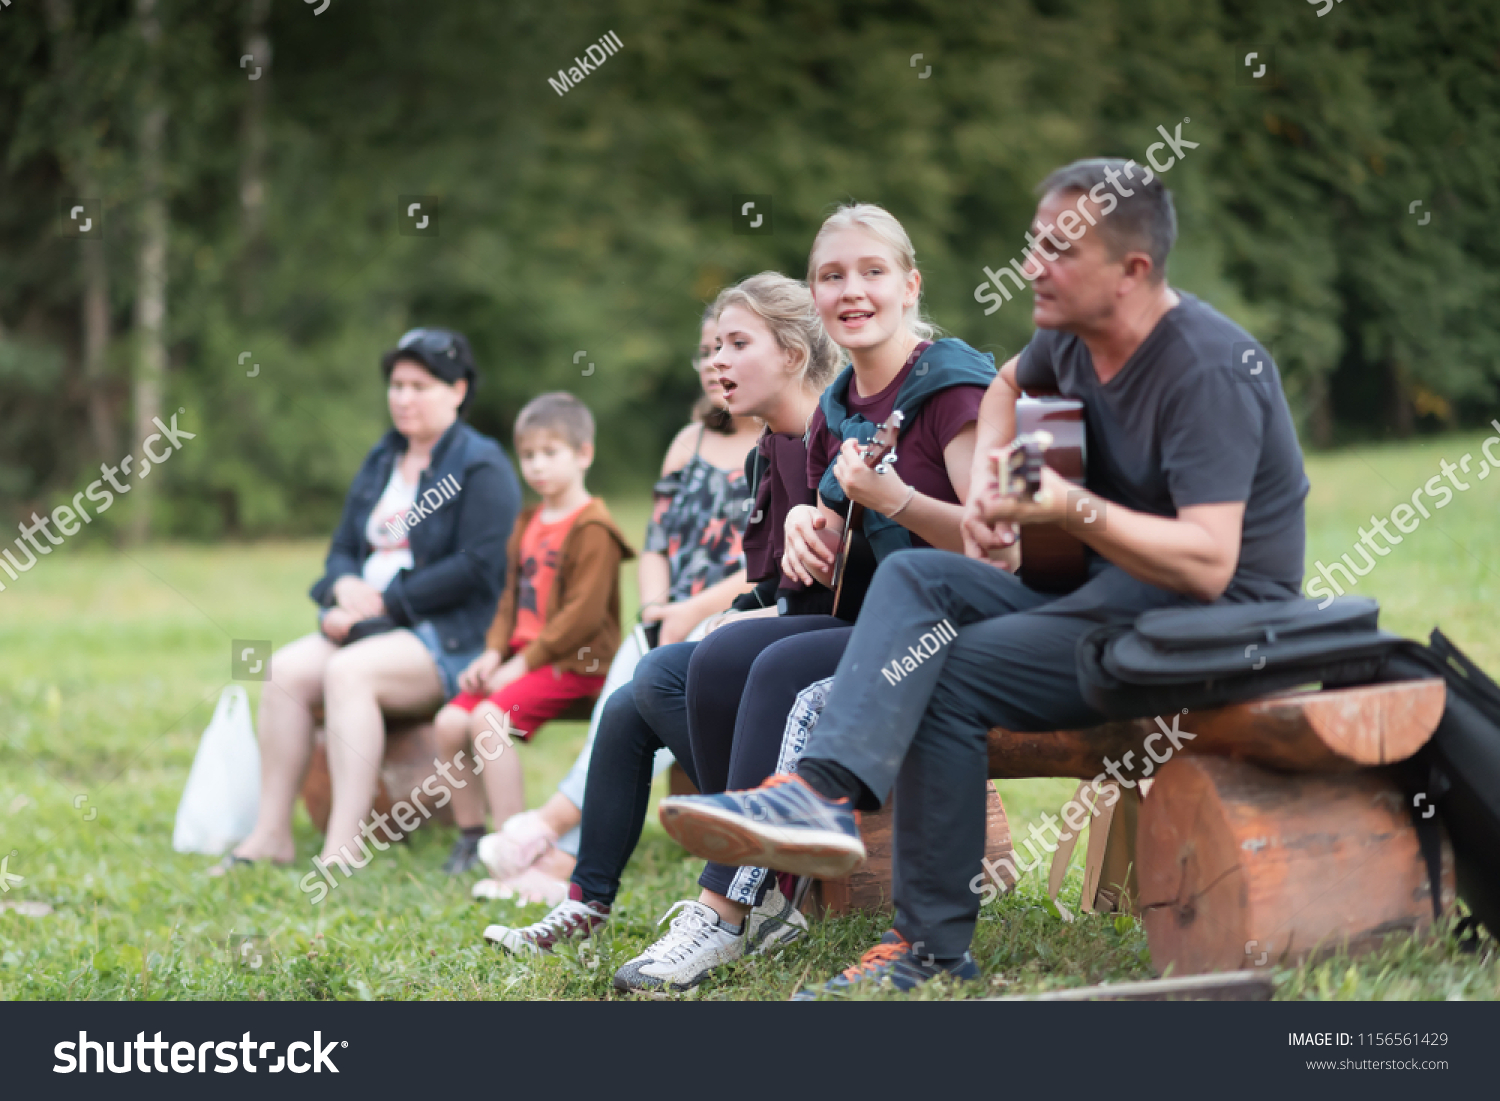 Zvenigorod, Russia, 15 AUG 2018. Group of happy friends with guitar in a central city park having fun outdoor. Camping couple. Adventure concept. Happy day. Musical concept. #1156561429